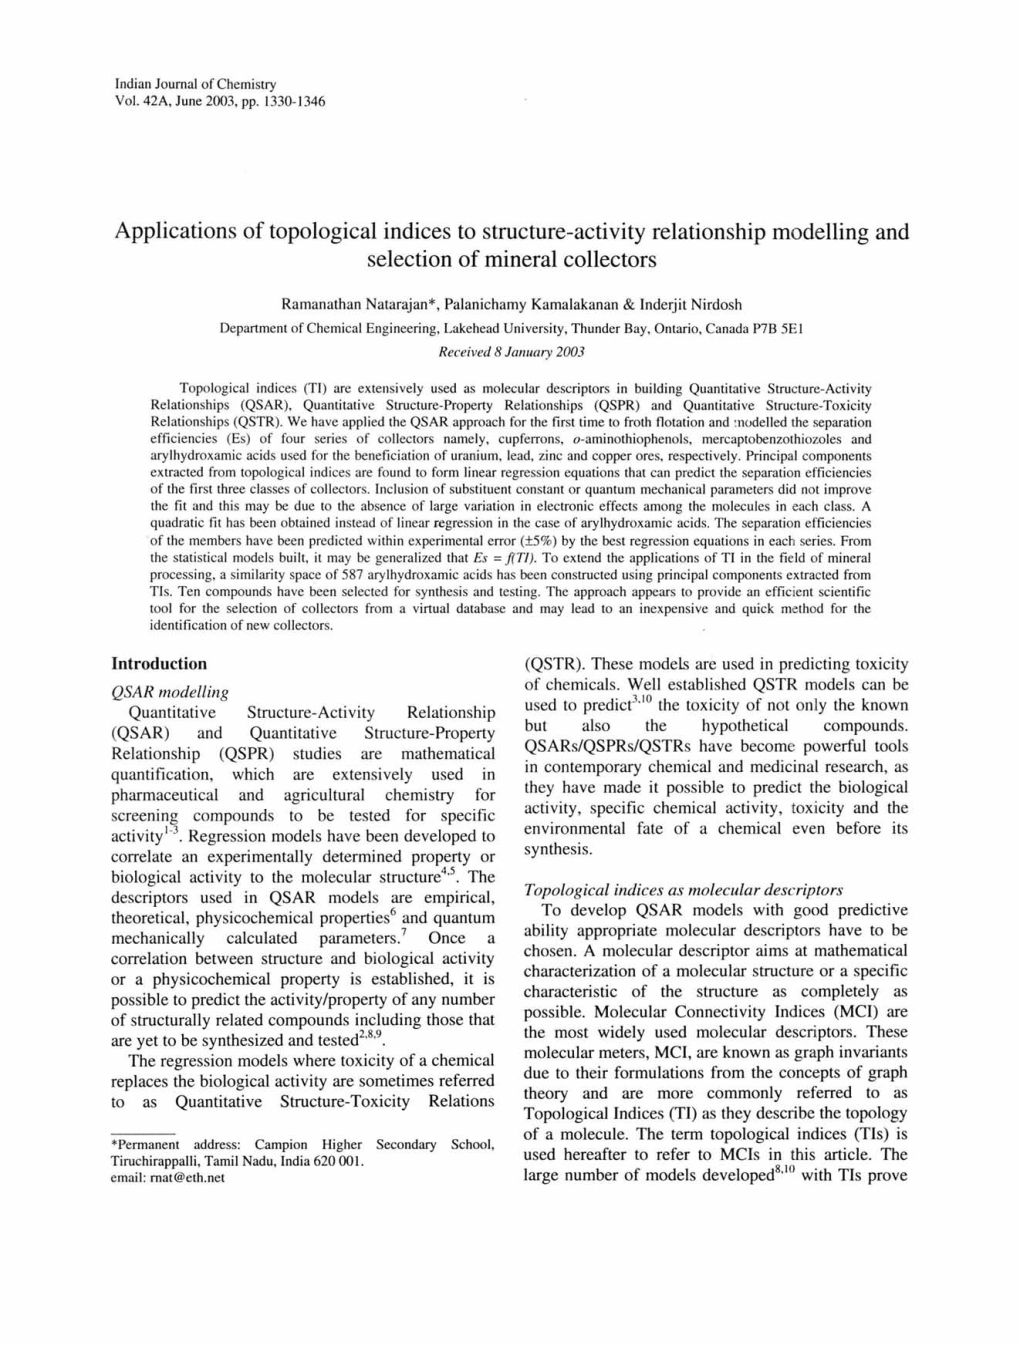 Applications of Topological Indices to Structure-Activity Relationship Modelling and Selection of Mineral Collectors